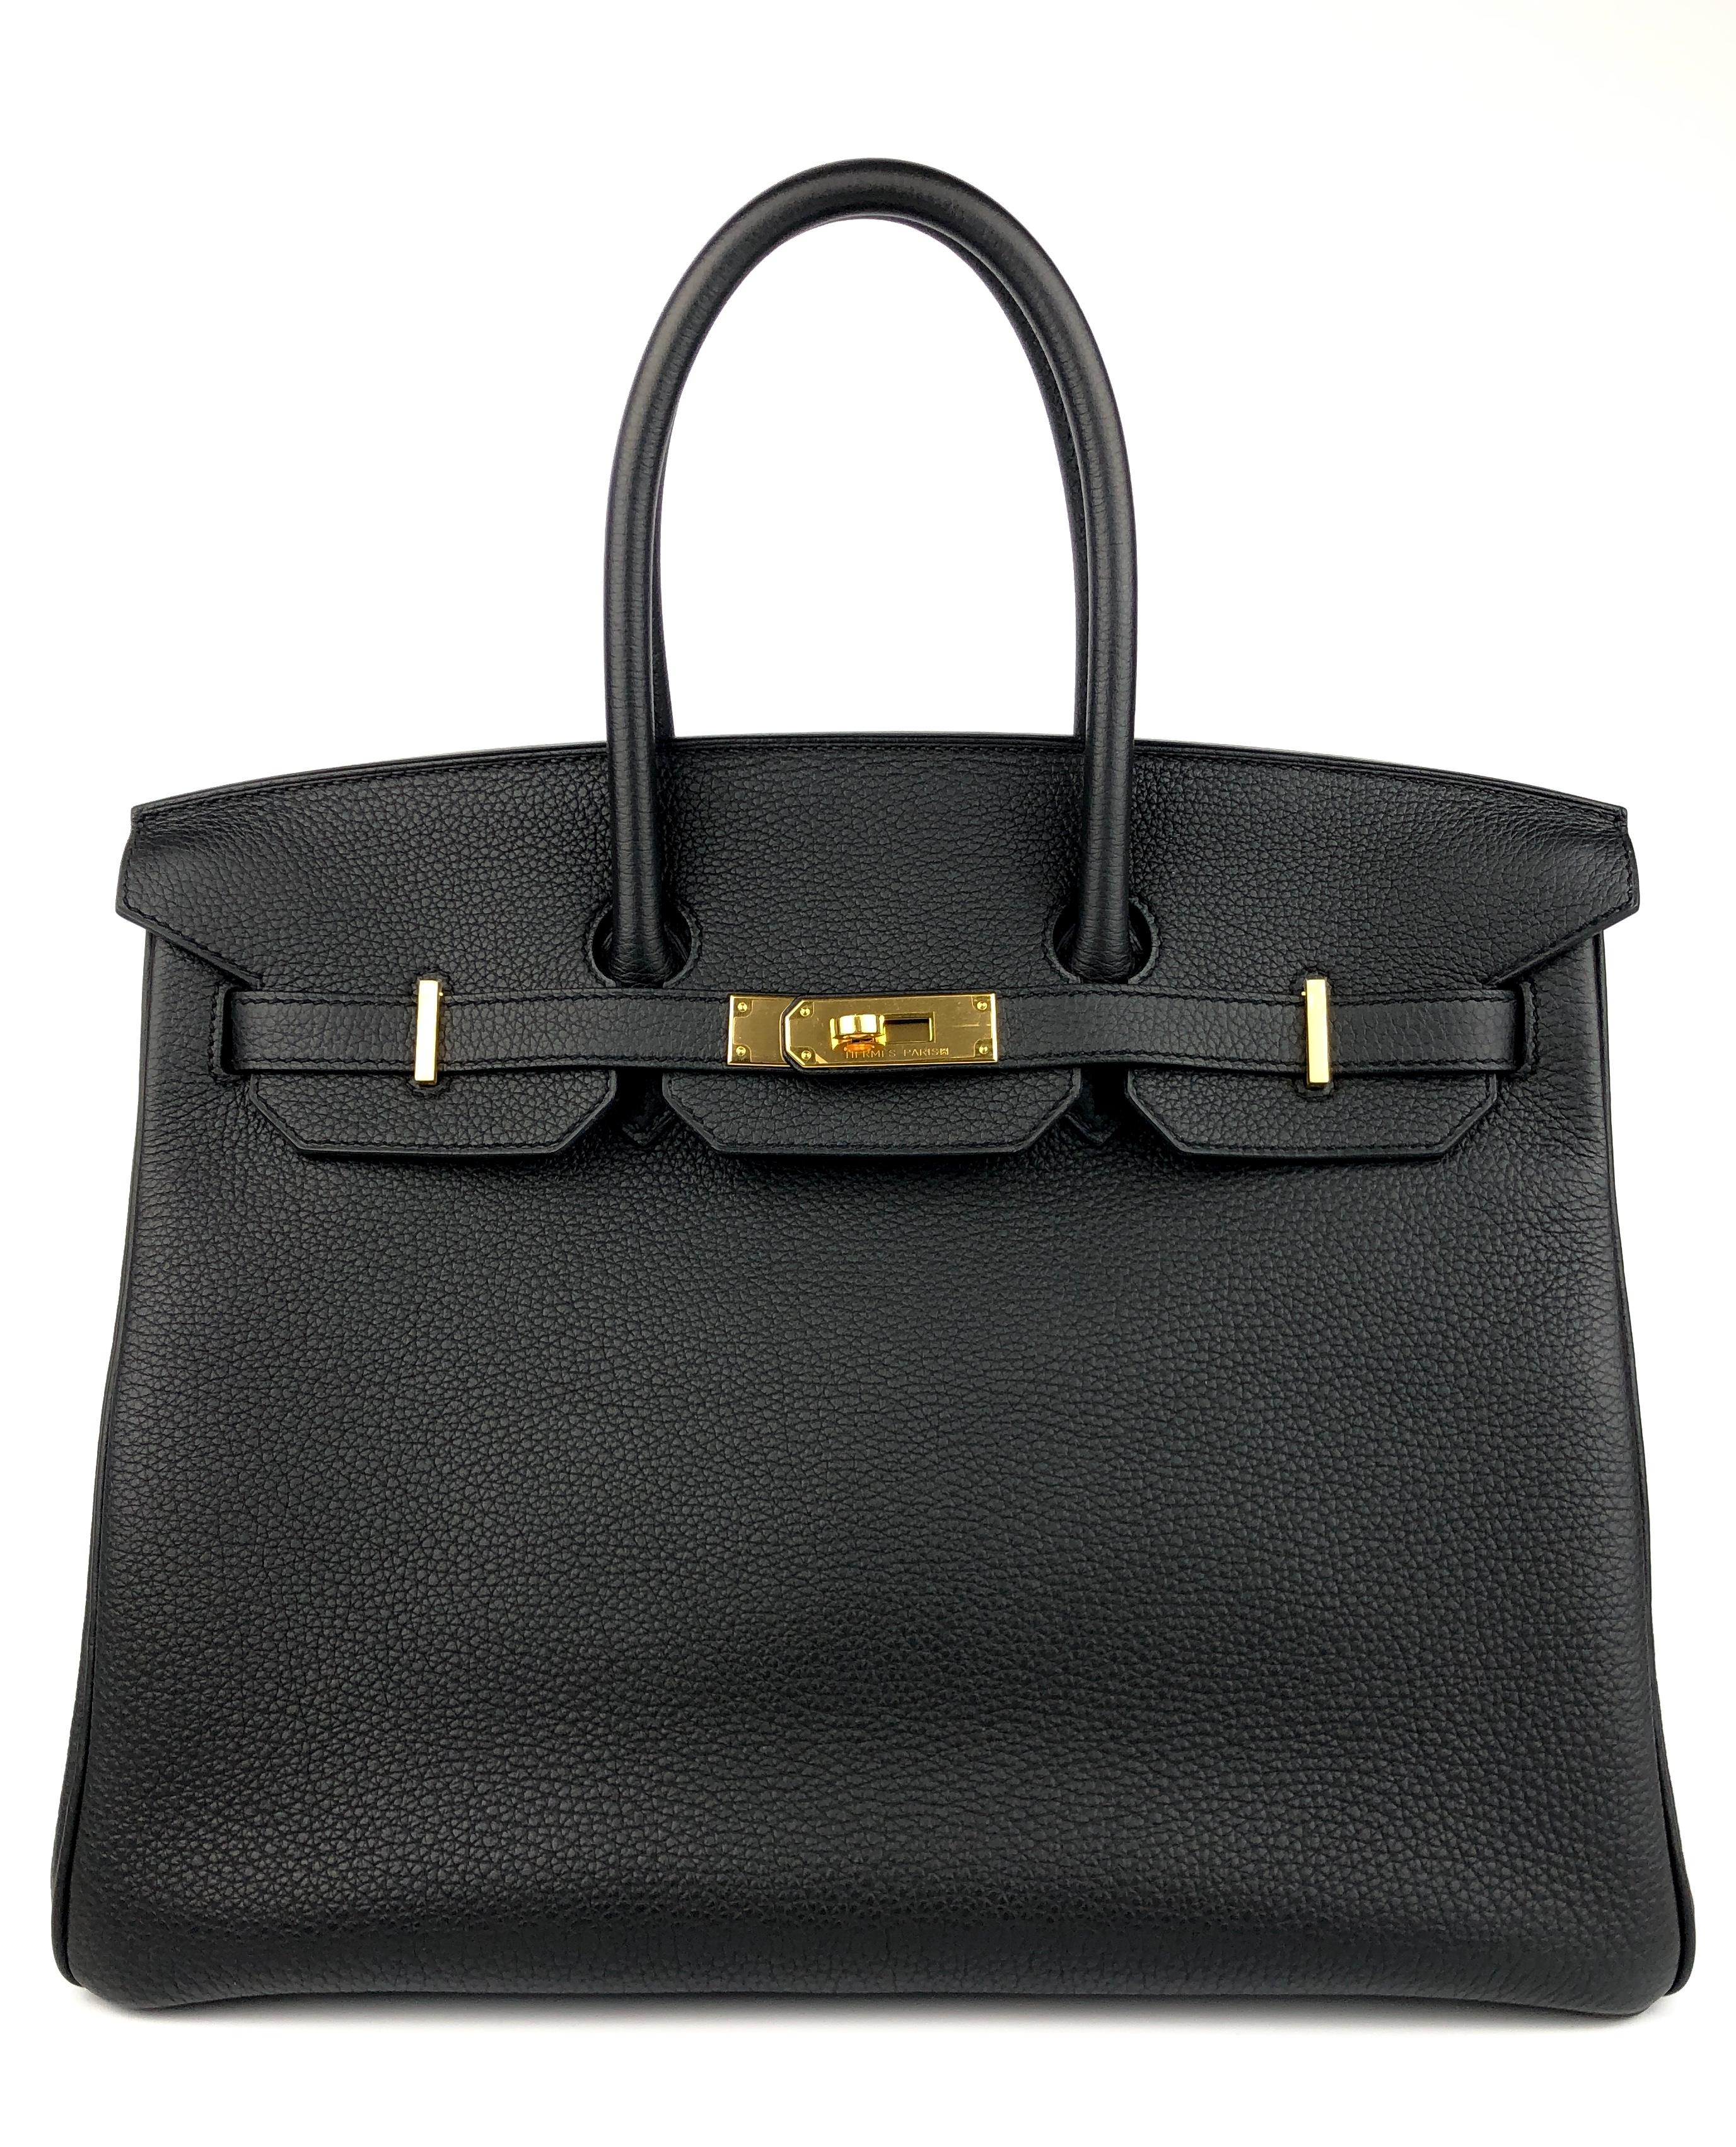 Beautiful Hermes Birkin 35 Black Togo Leather complimented by Gold Hardware. Pristine Condition with all plastic on hardware Perfect corner excellent structure! 2016 X Stamp. 

Shop with Confidence with Lux Addicts. Authenticity Guaranteed!